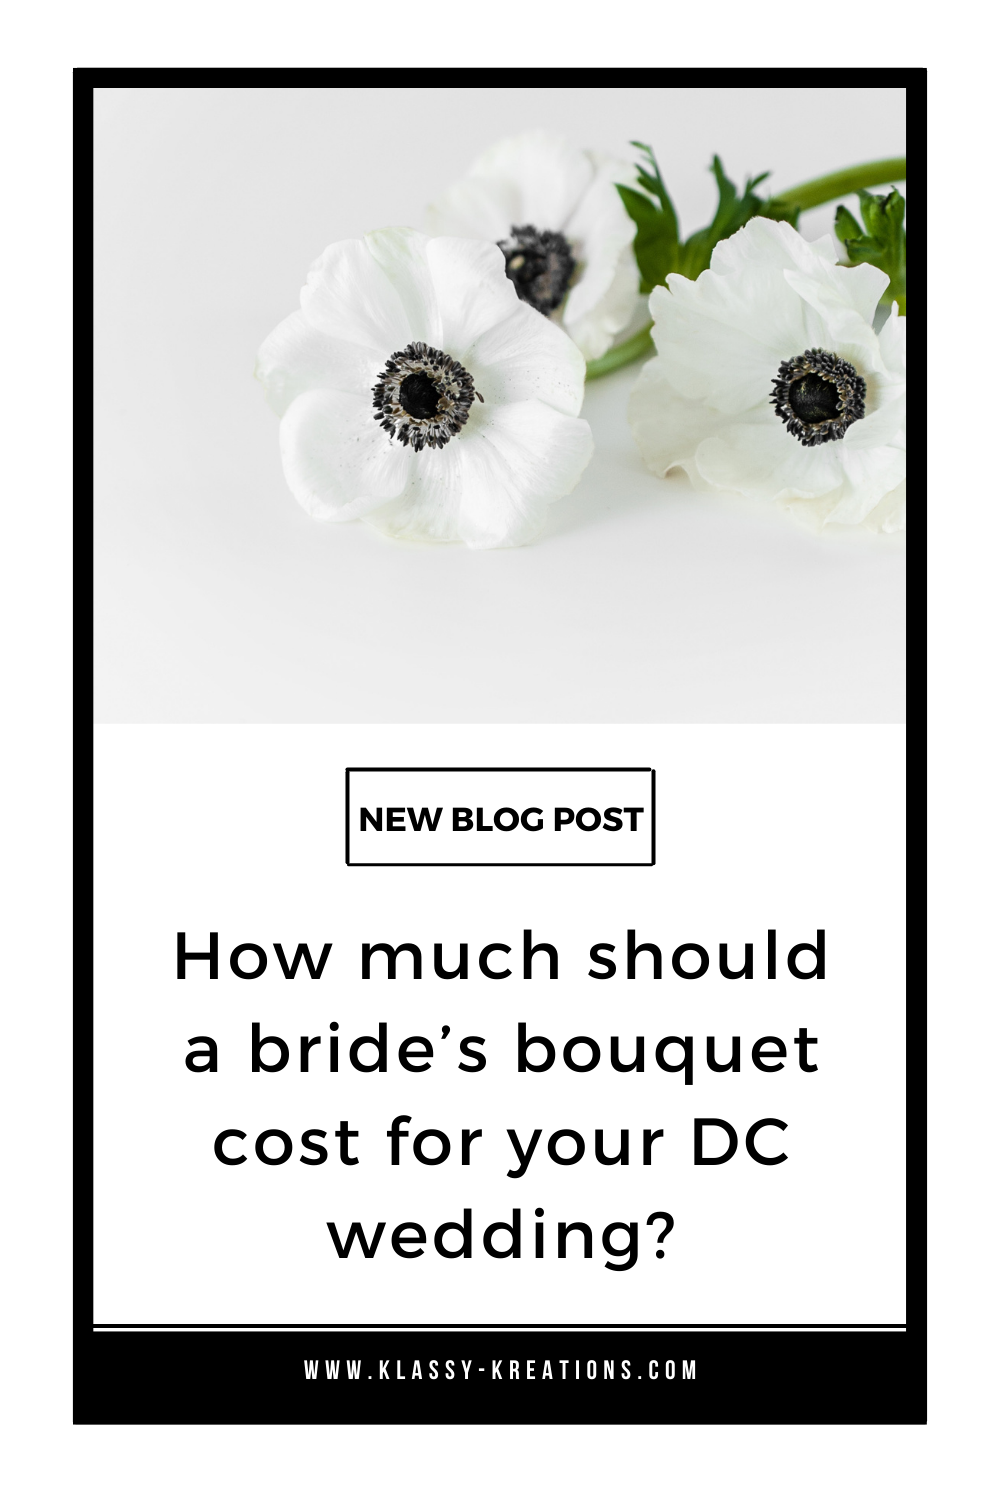 pinterest-blog-post-how-much-should-a-brides-bouquet-cost-for-your-dc-wedding